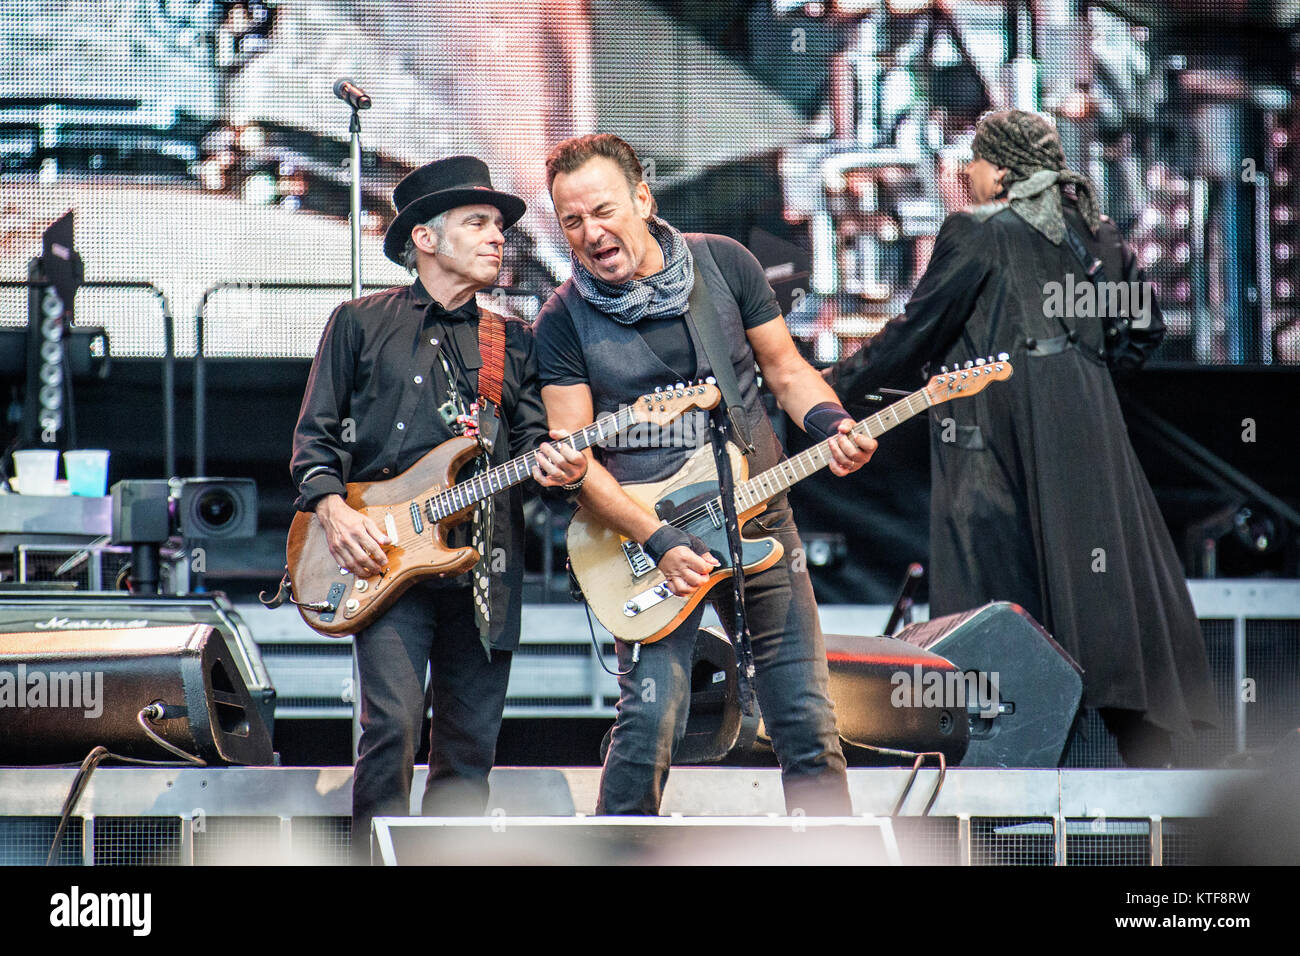 The American singer, songwriter and musician Bruce Springsteen performs a live concert with his band The E Street Band at Ullevaal Stadion in Oslo. Here he is seen live on stage with guitarist Nils Lofgren. Norway, 29/06 2016.. Norway, 29/06 2016. Norway, 29/06 2016. Stock Photo